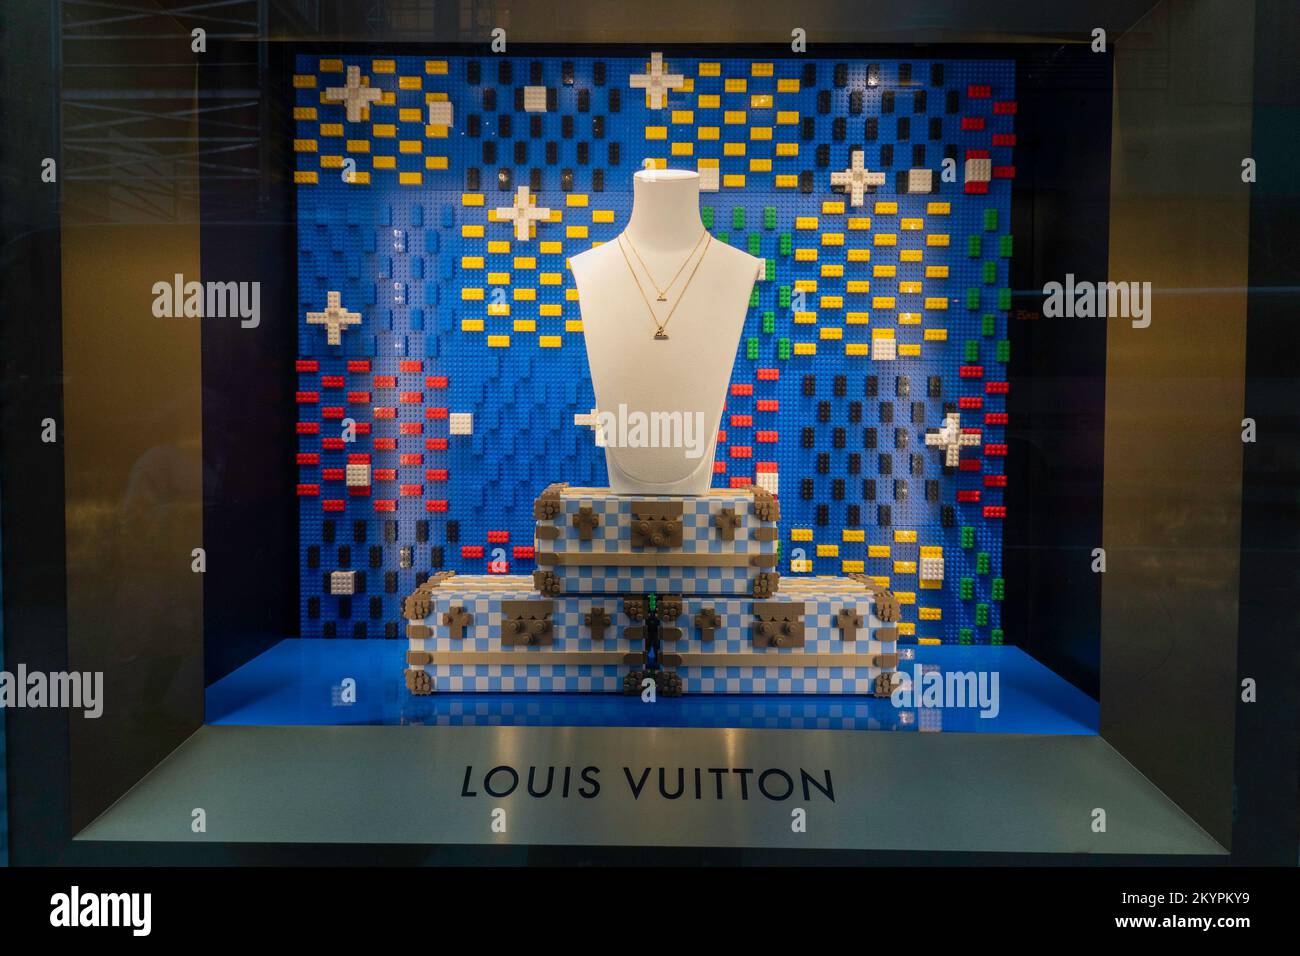 Louis Vuitton And LEGO Hook Up For Festive Window And Store Displays